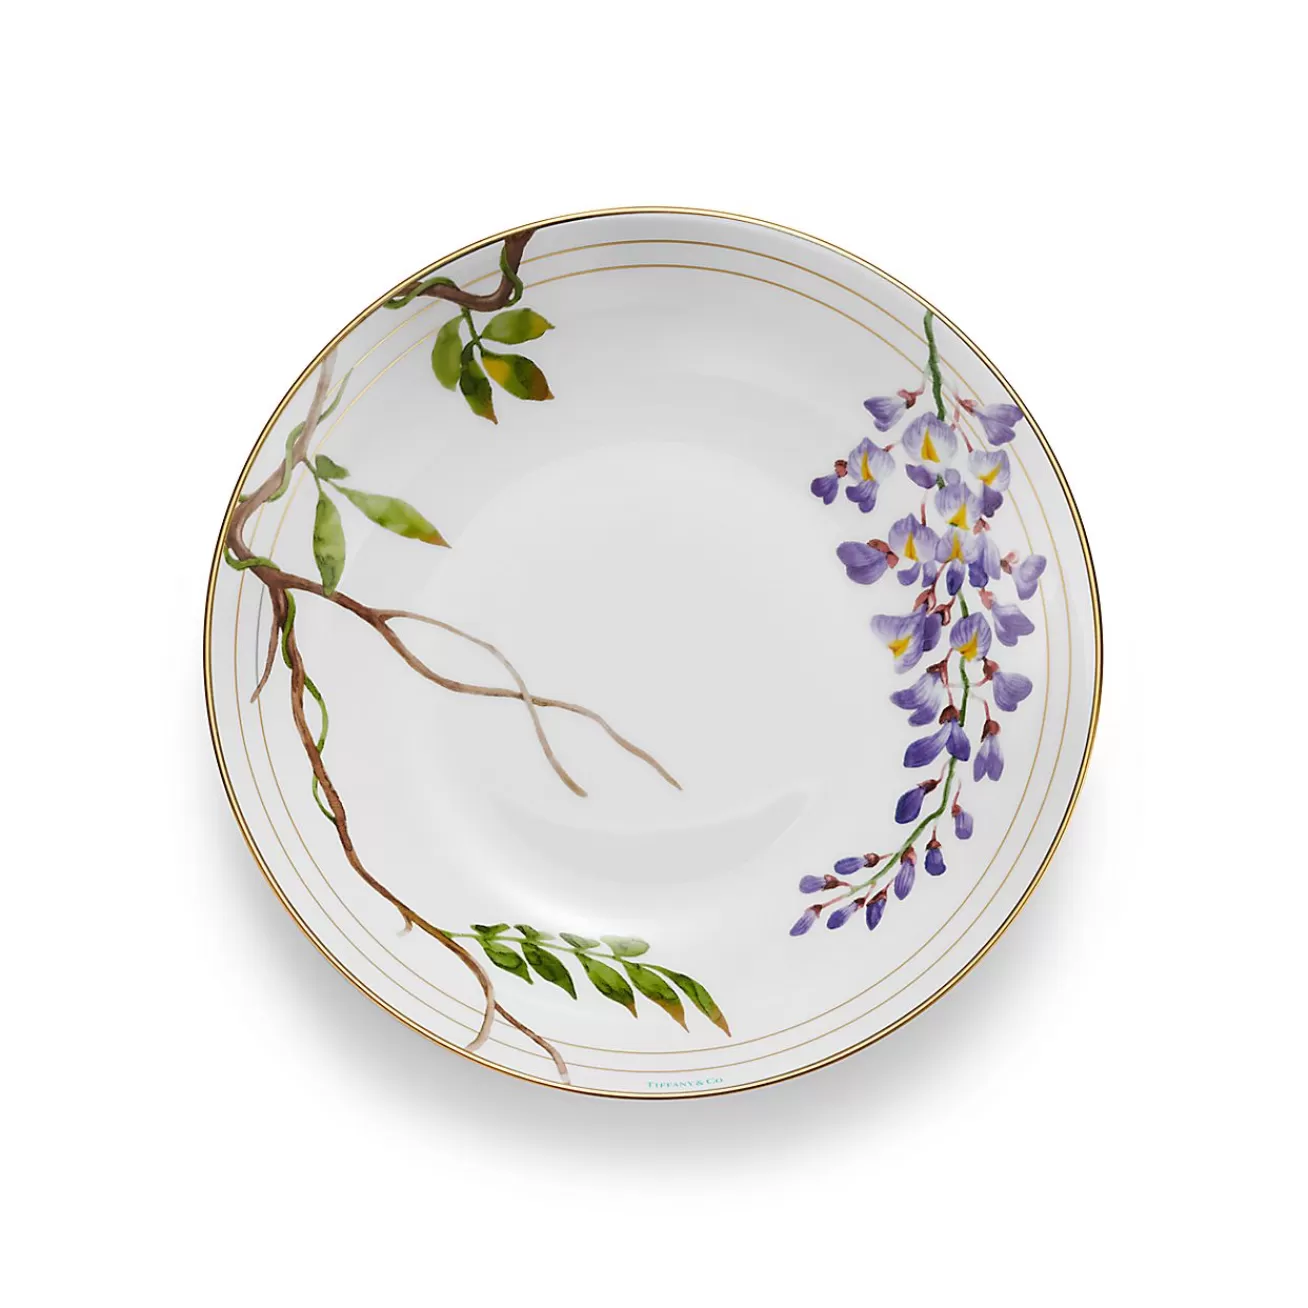 Tiffany & Co. Tiffany Wisteria Bowl in Porcelain | ^ The Home | Housewarming Gifts